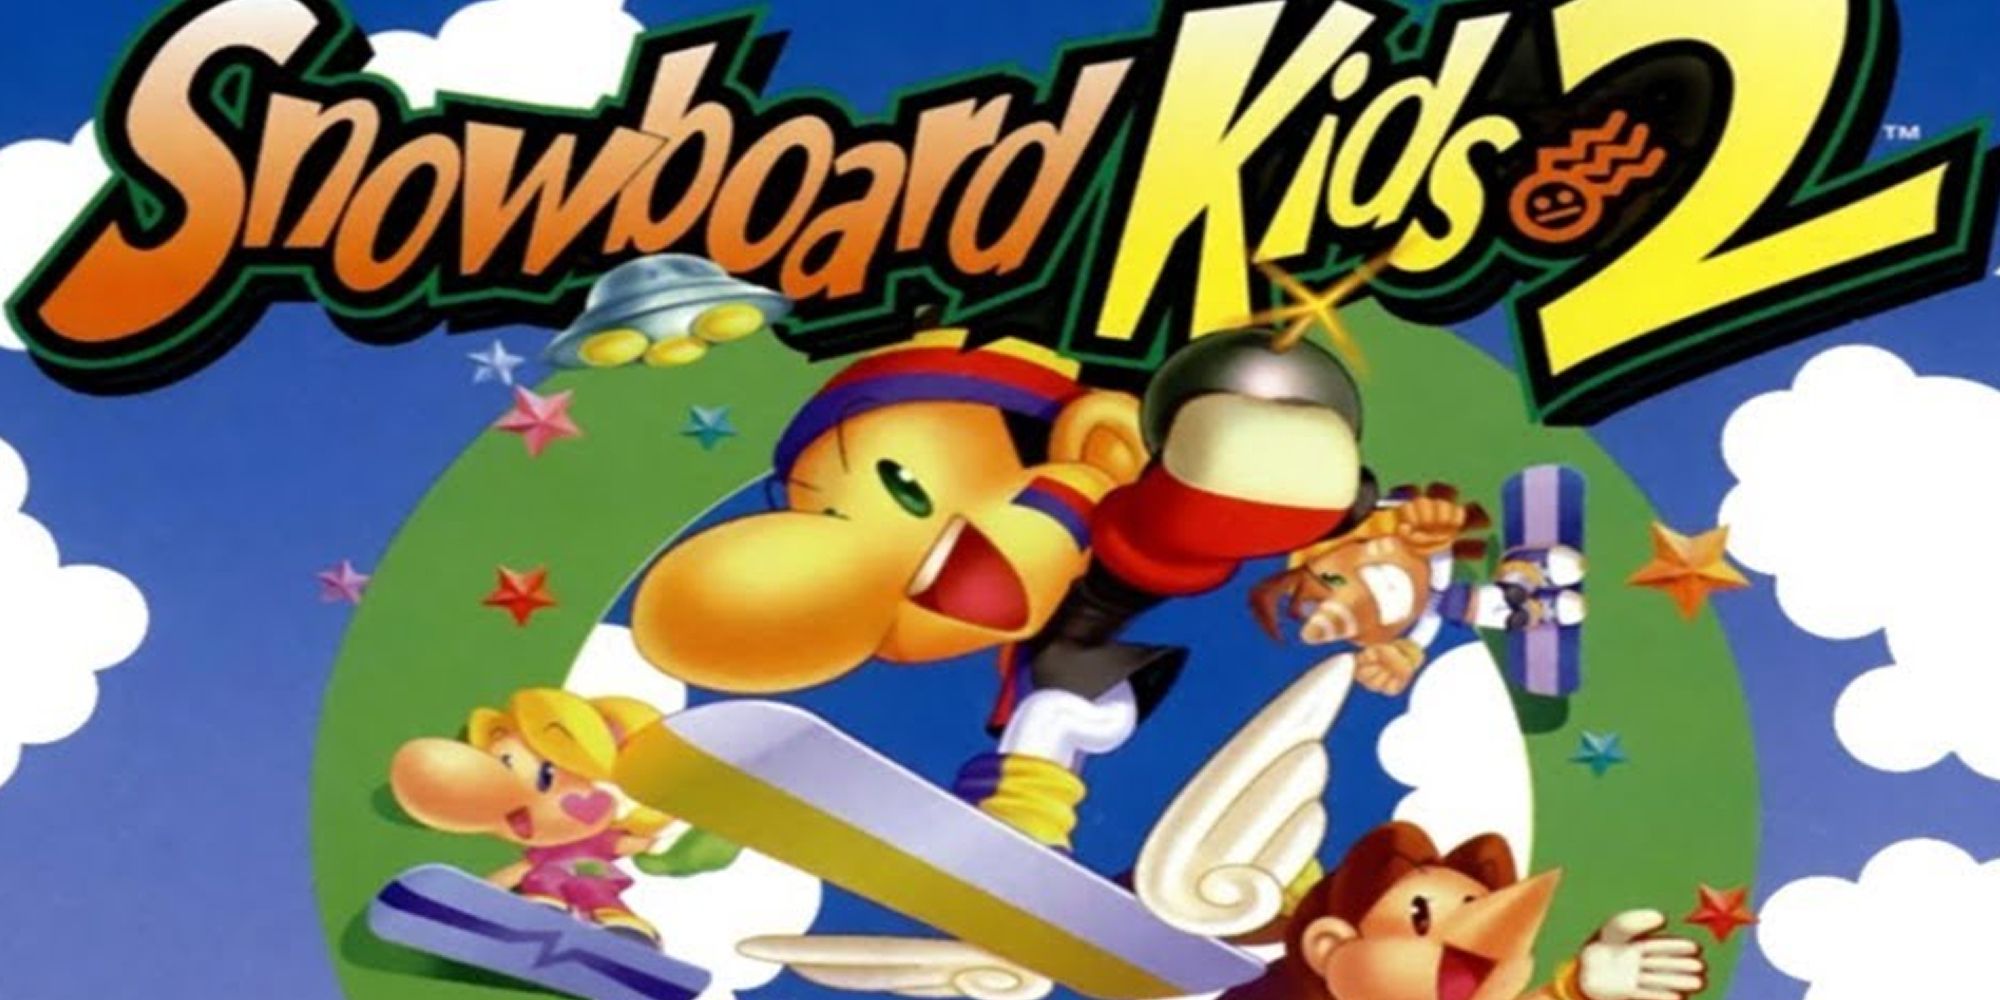 Snowboard Kids 2 Title And Characters